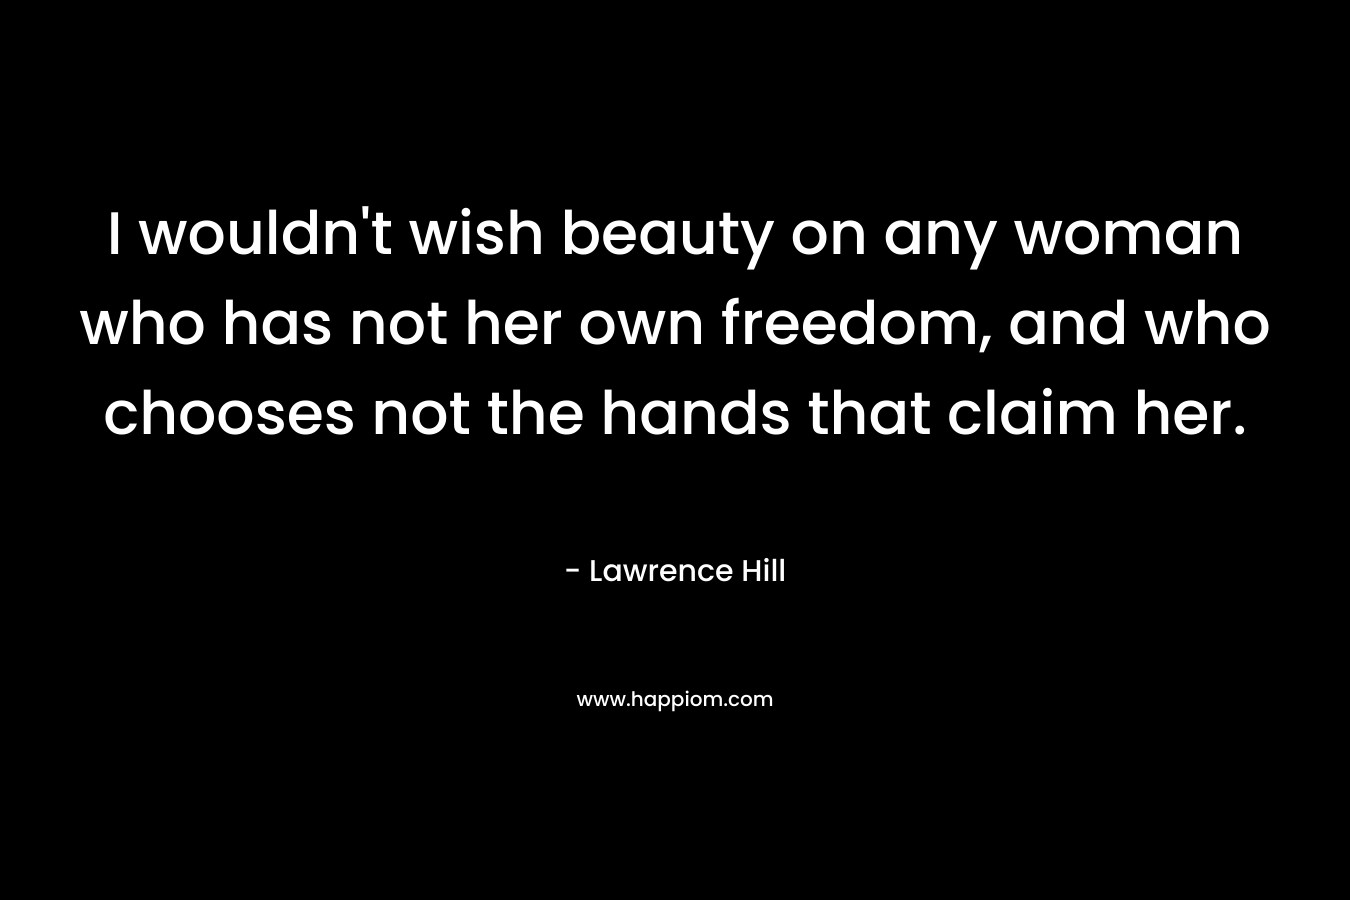 I wouldn’t wish beauty on any woman who has not her own freedom, and who chooses not the hands that claim her. – Lawrence Hill